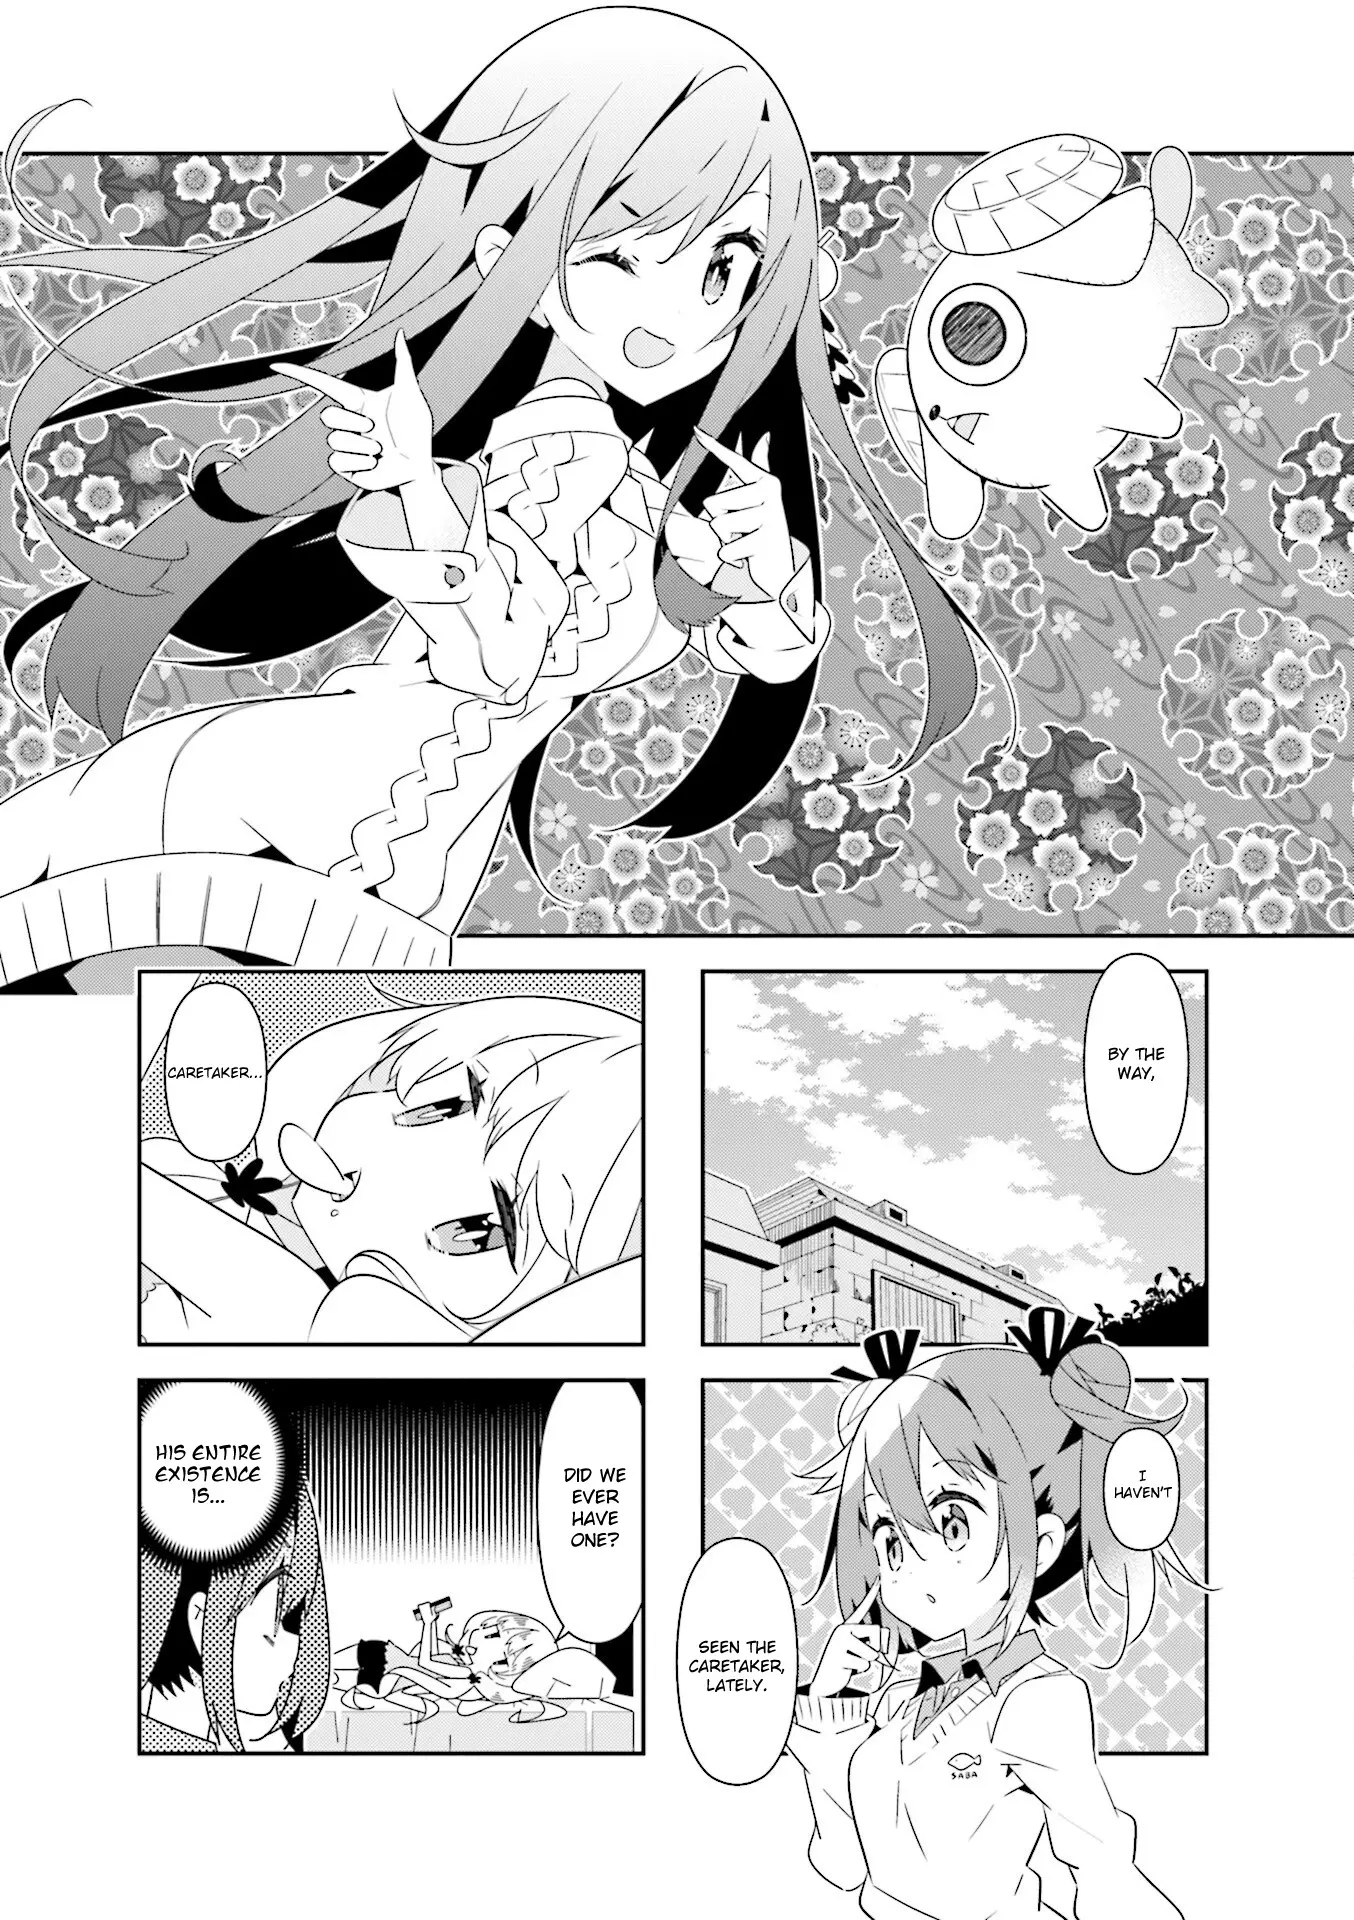 The Life After Retirement Of Magical Girls - 29 page 1-1d6c9915